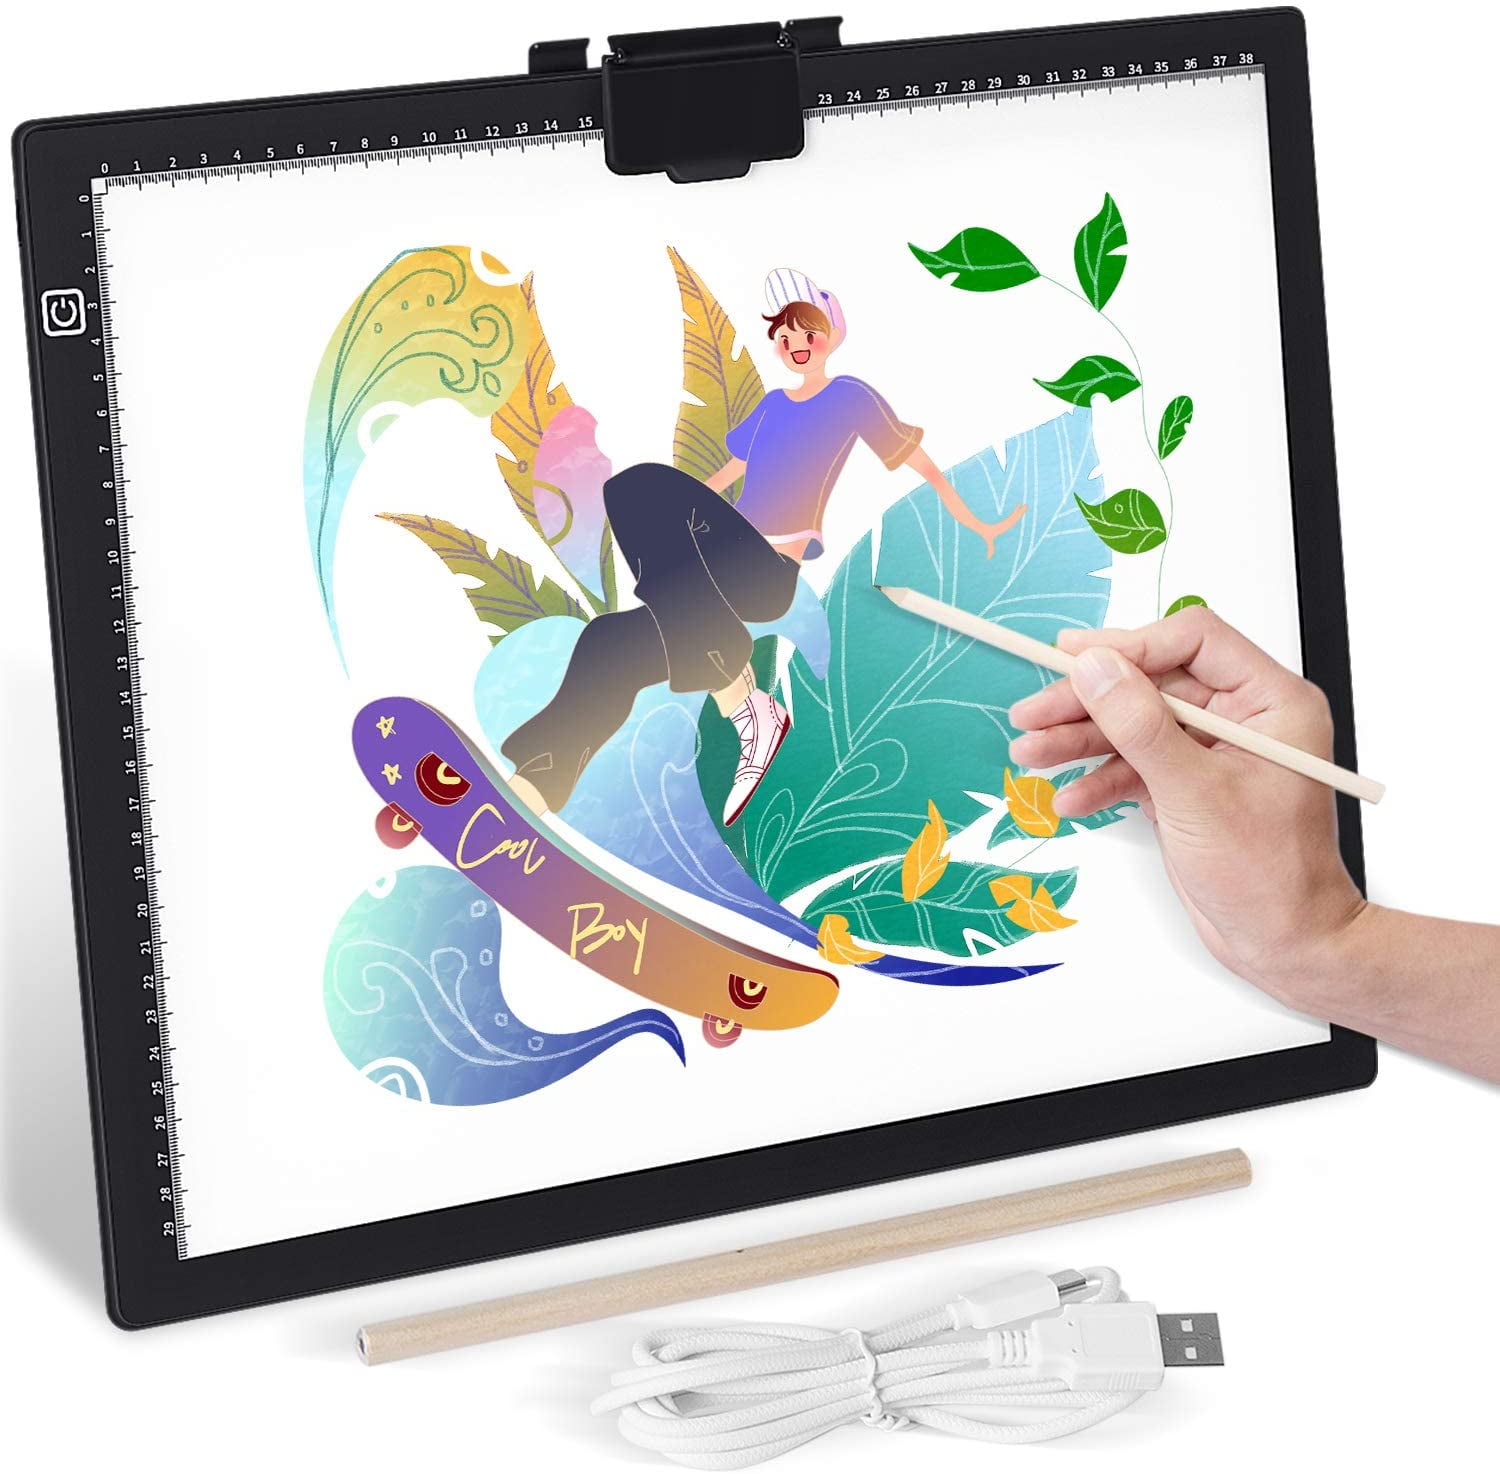 Portable A4 Tracing LED Copy Board Light Pad,Light Board with Protect Frame,Ultra-Thin 3 Color Temperatures Stepless Dimming Light Box for Weedind